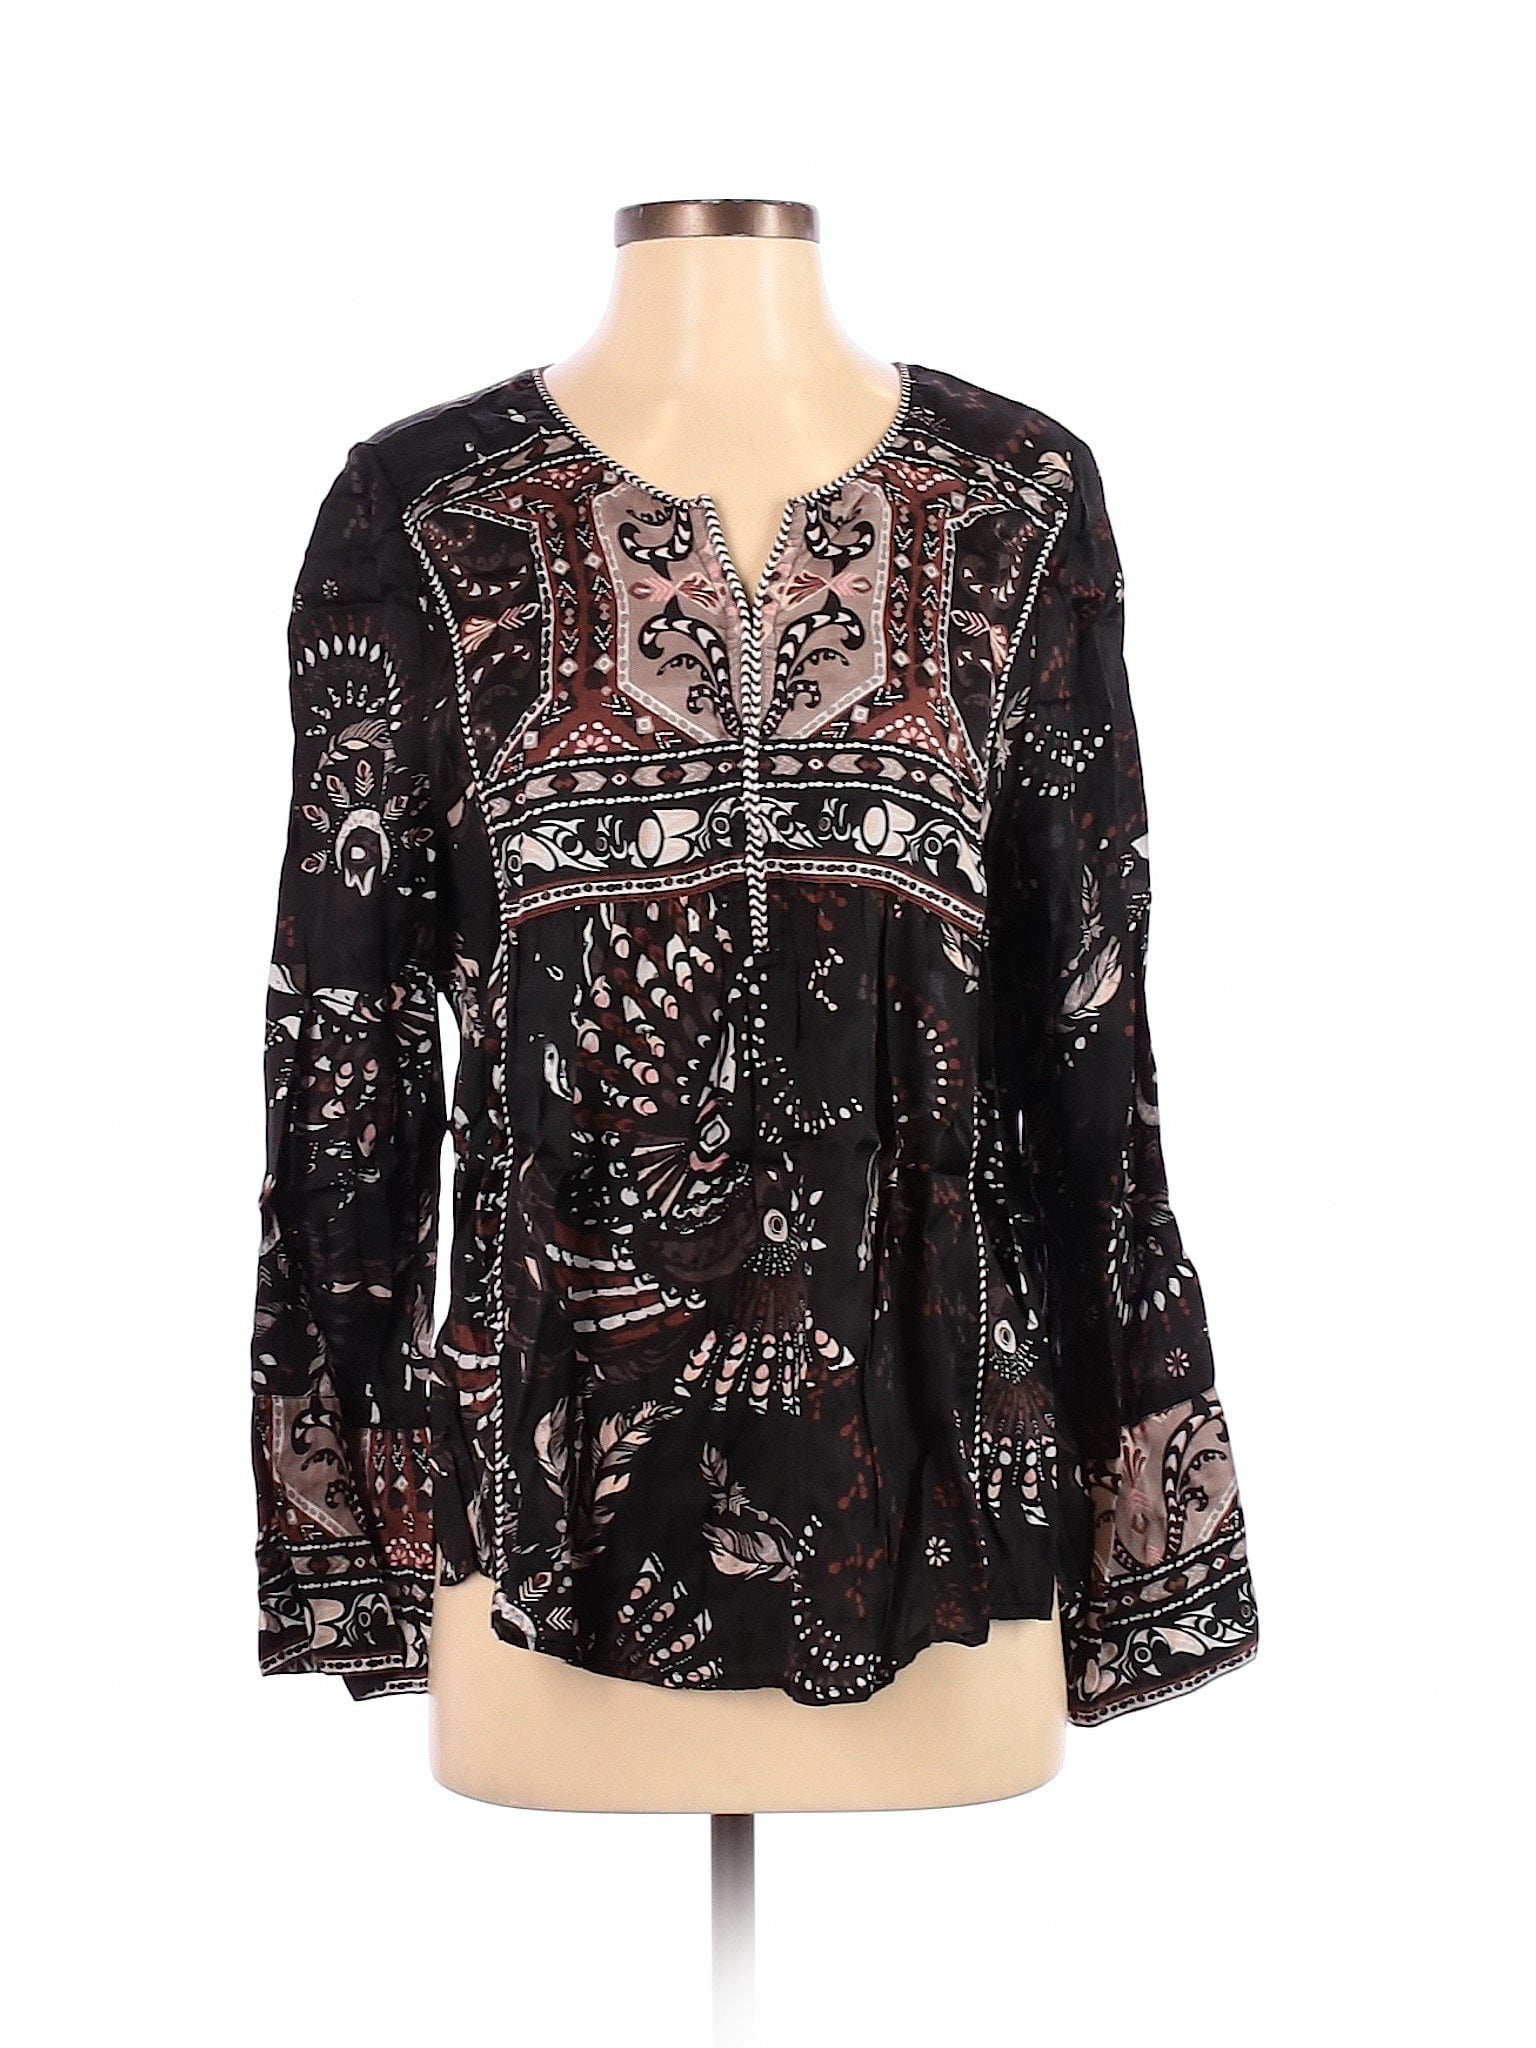 Odd Molly - Pre-Owned Odd Molly Women's Size S Long Sleeve Blouse ...